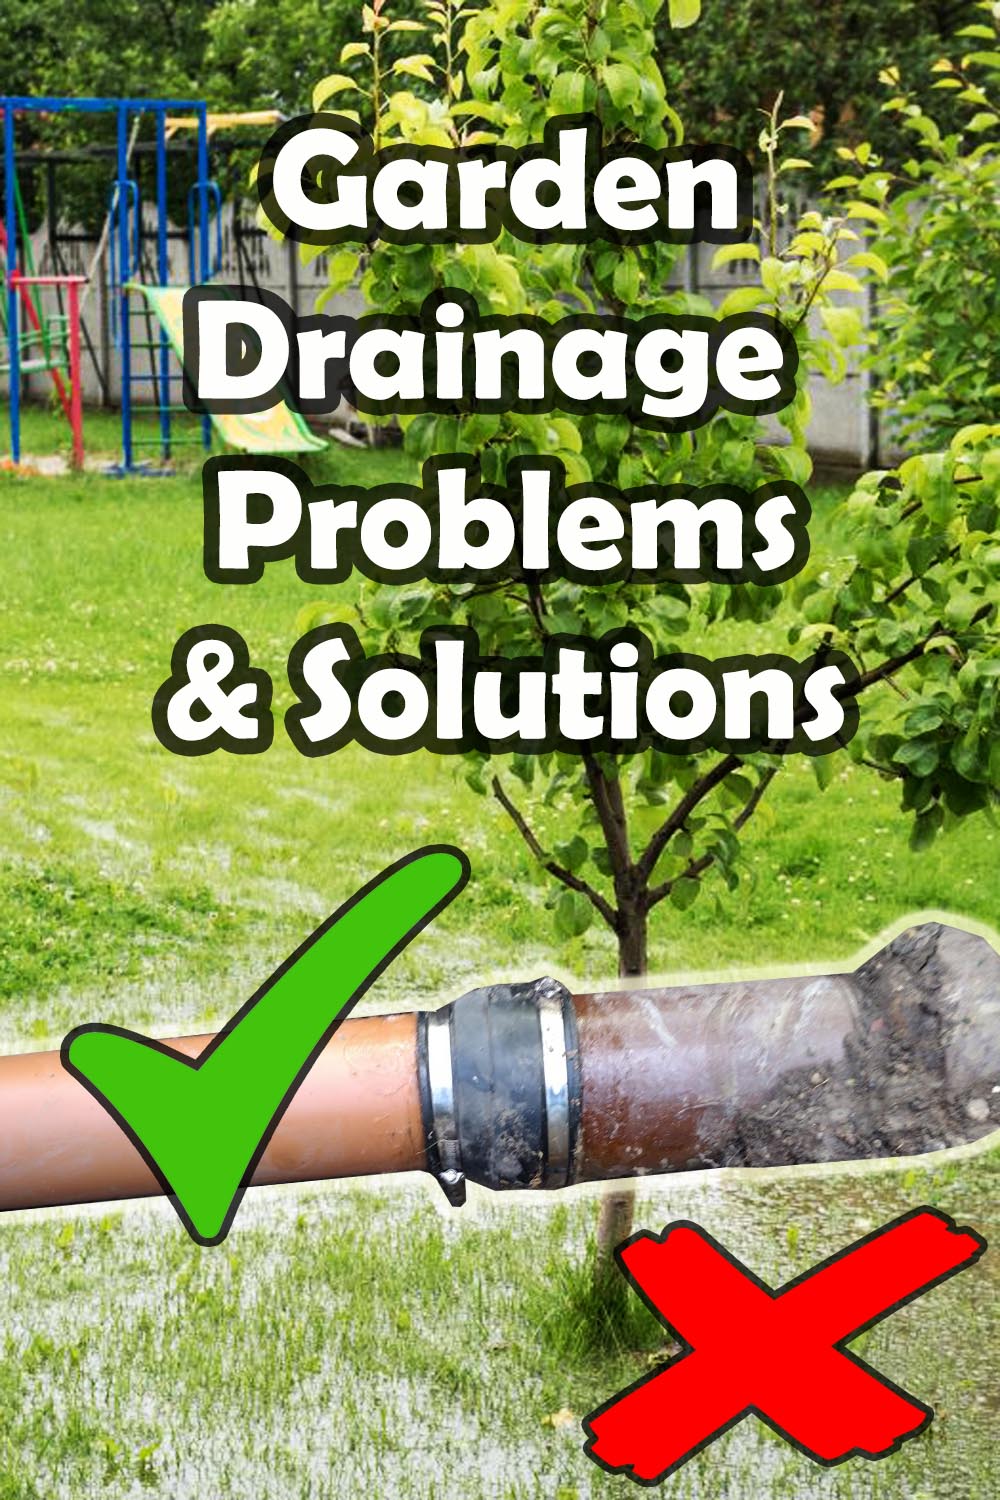 Garden drainage problems & solutions